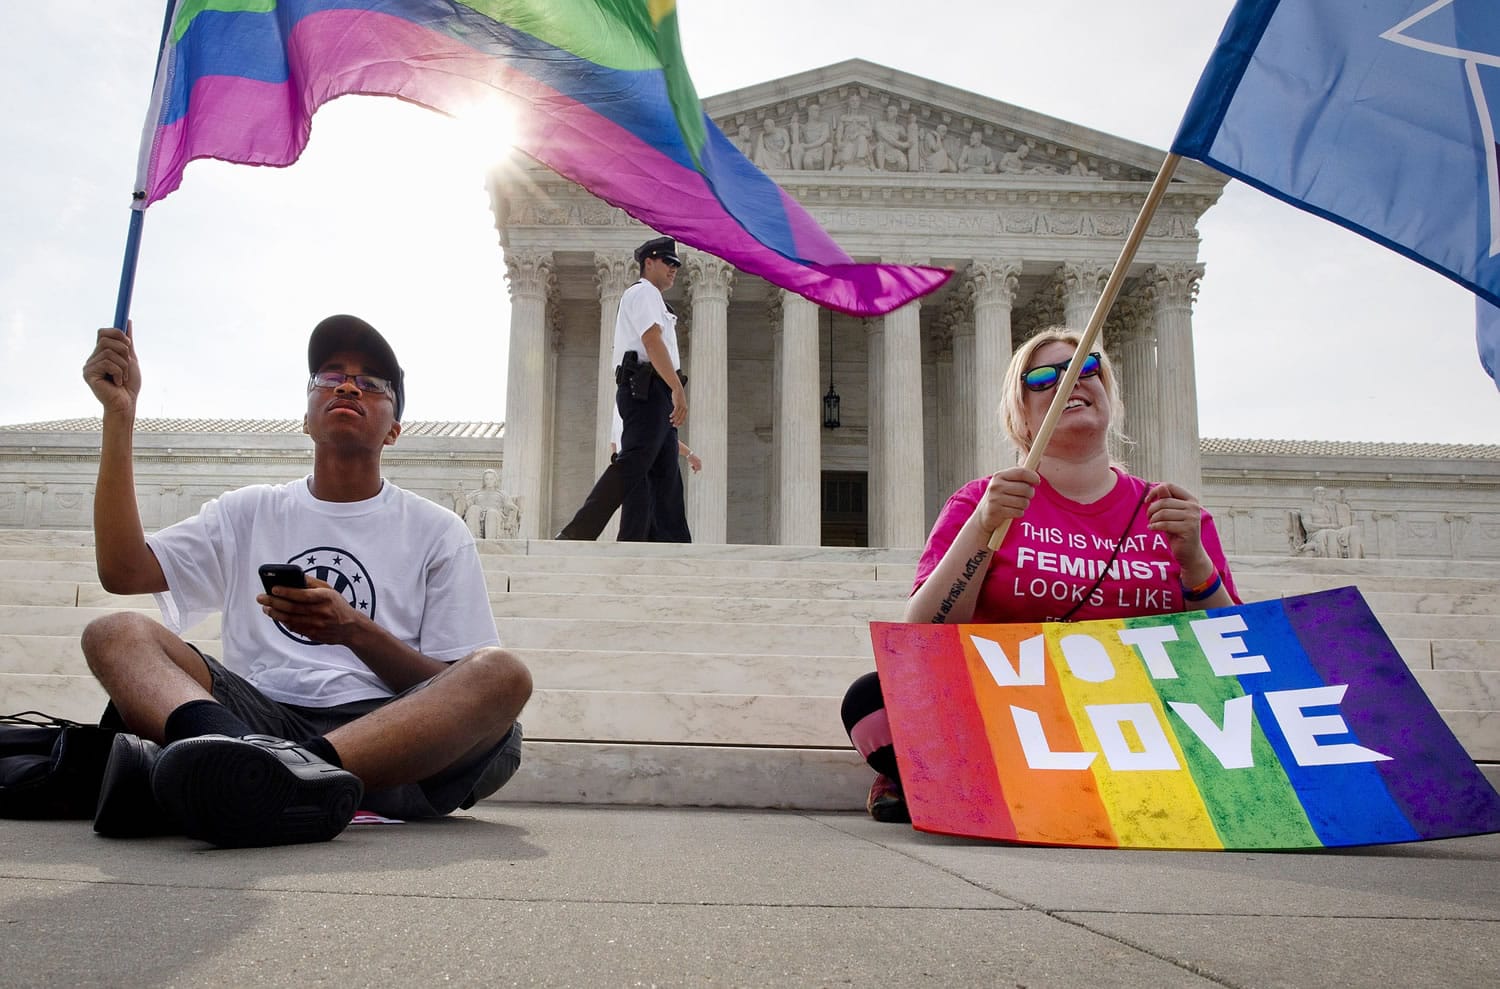 Carlos McKnight, 17, of Washington, left, and Katherine Nicole Struck, 25, of Frederick, Md., hold flags in support of gay marriage as security walks behind outside of the Supreme Court in Washington, Friday June 26, 2015.